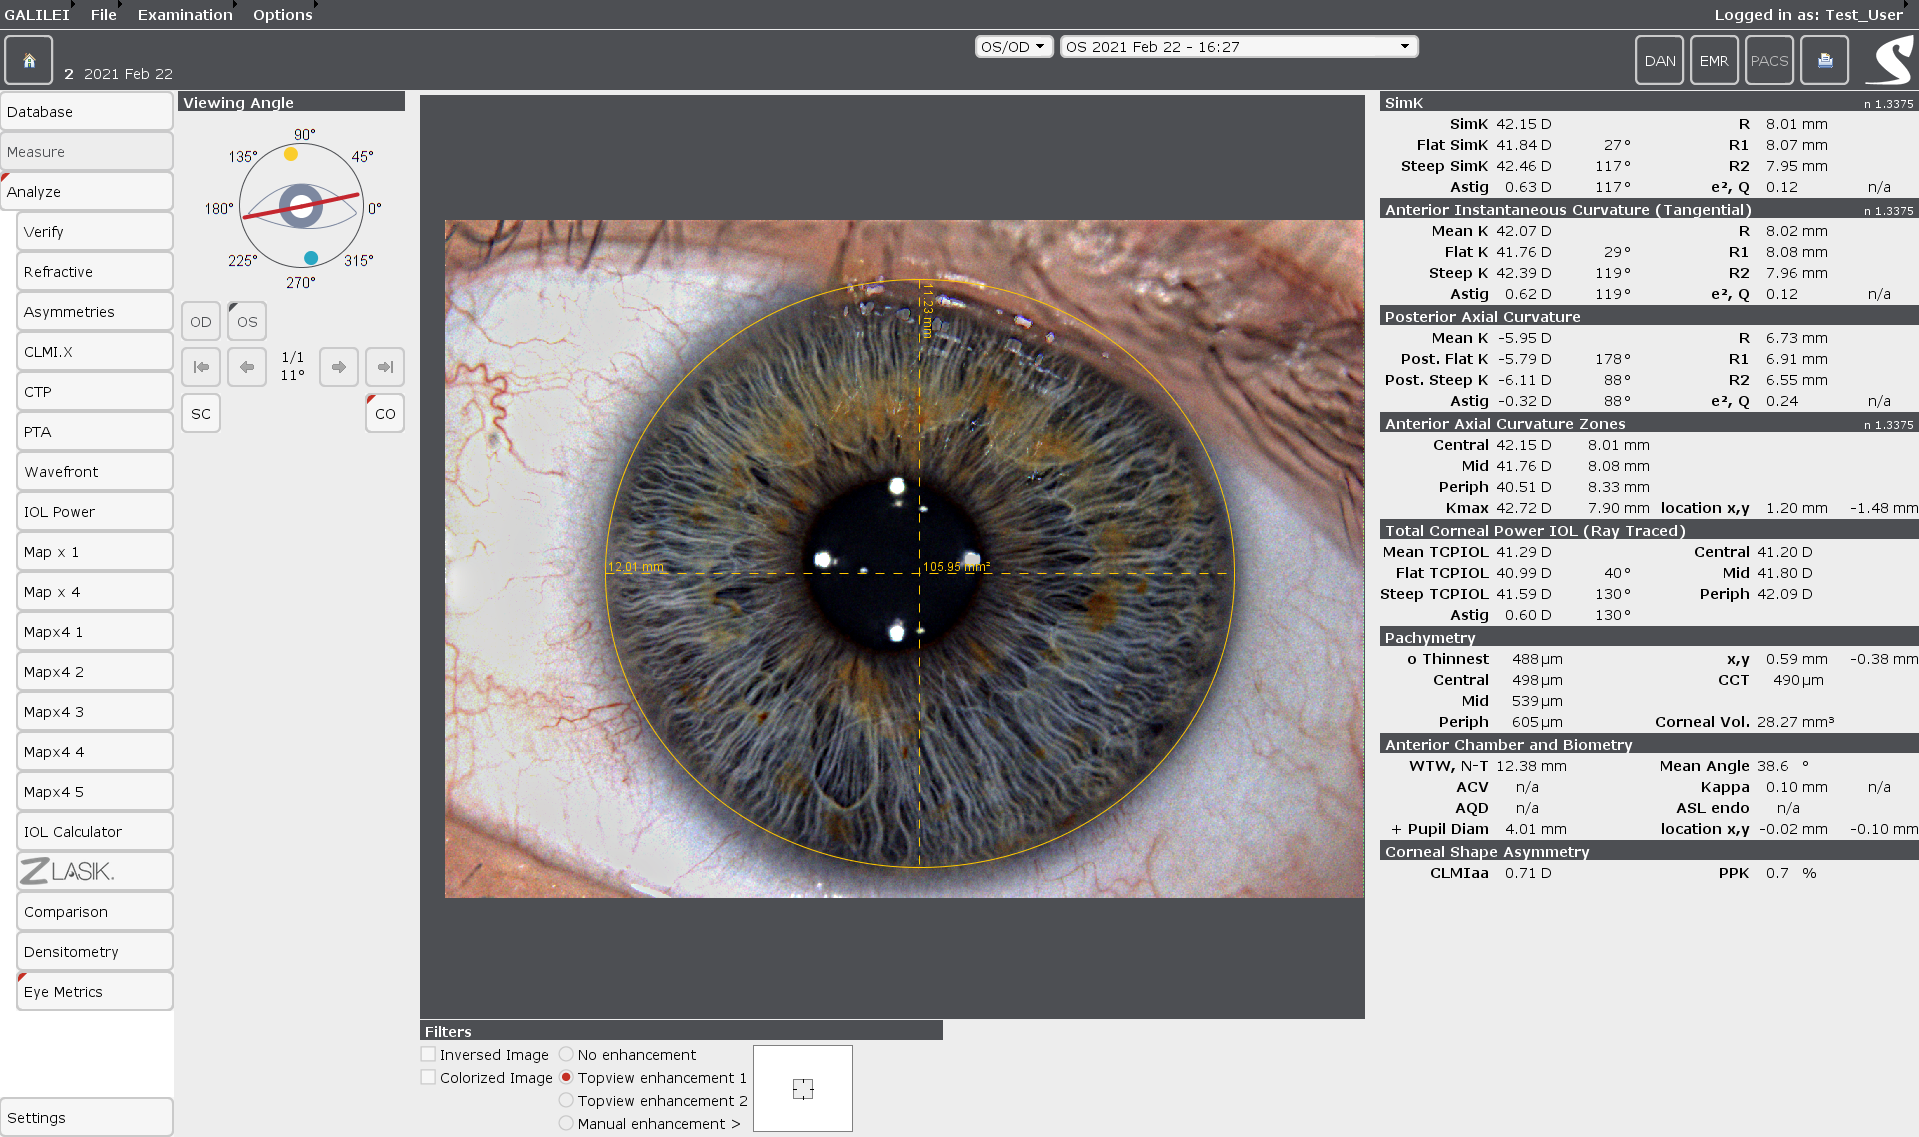 The Color Eye Metrics display can be used for different surgeries. Opacities can be located within the cornea. 